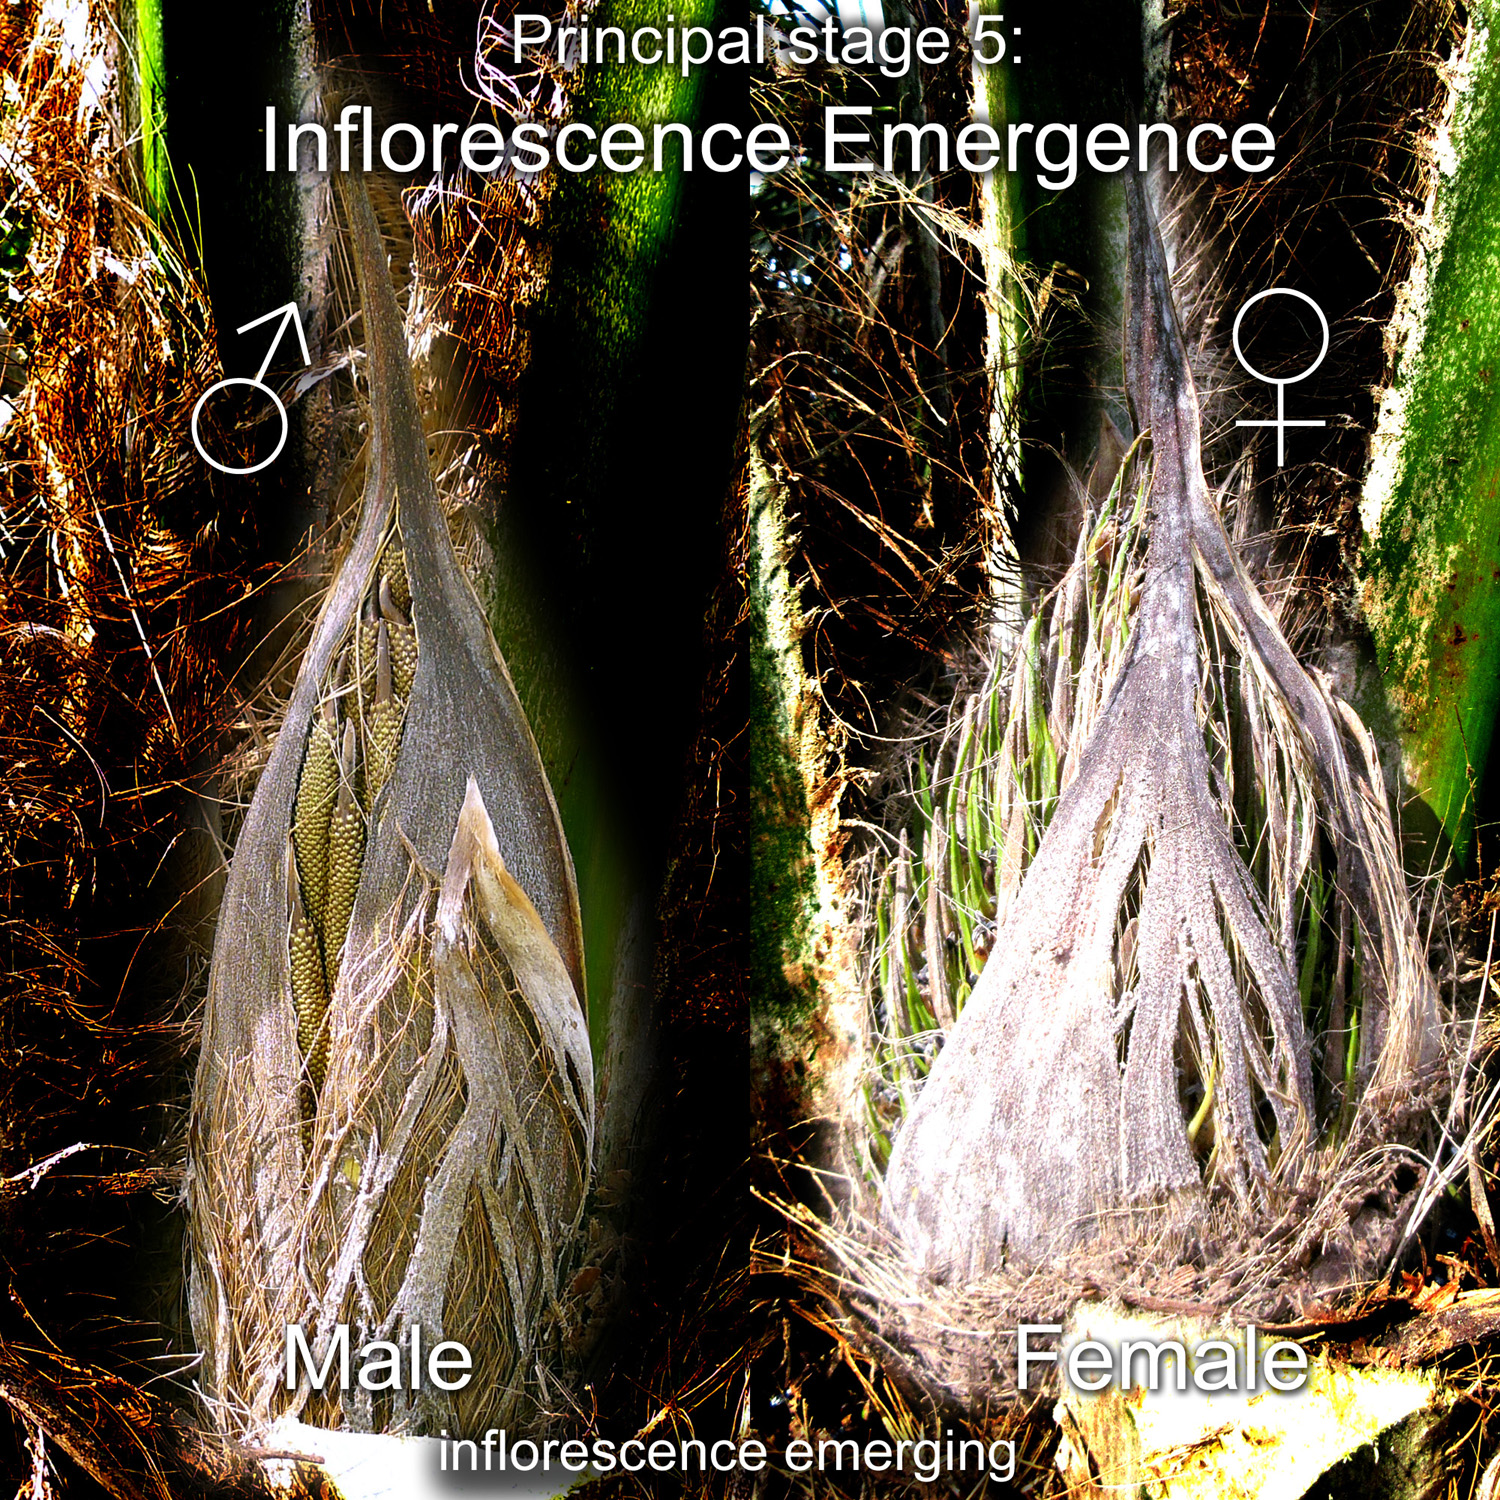 Principal stage 5: Inflorescence Emergence of an oil palm tree